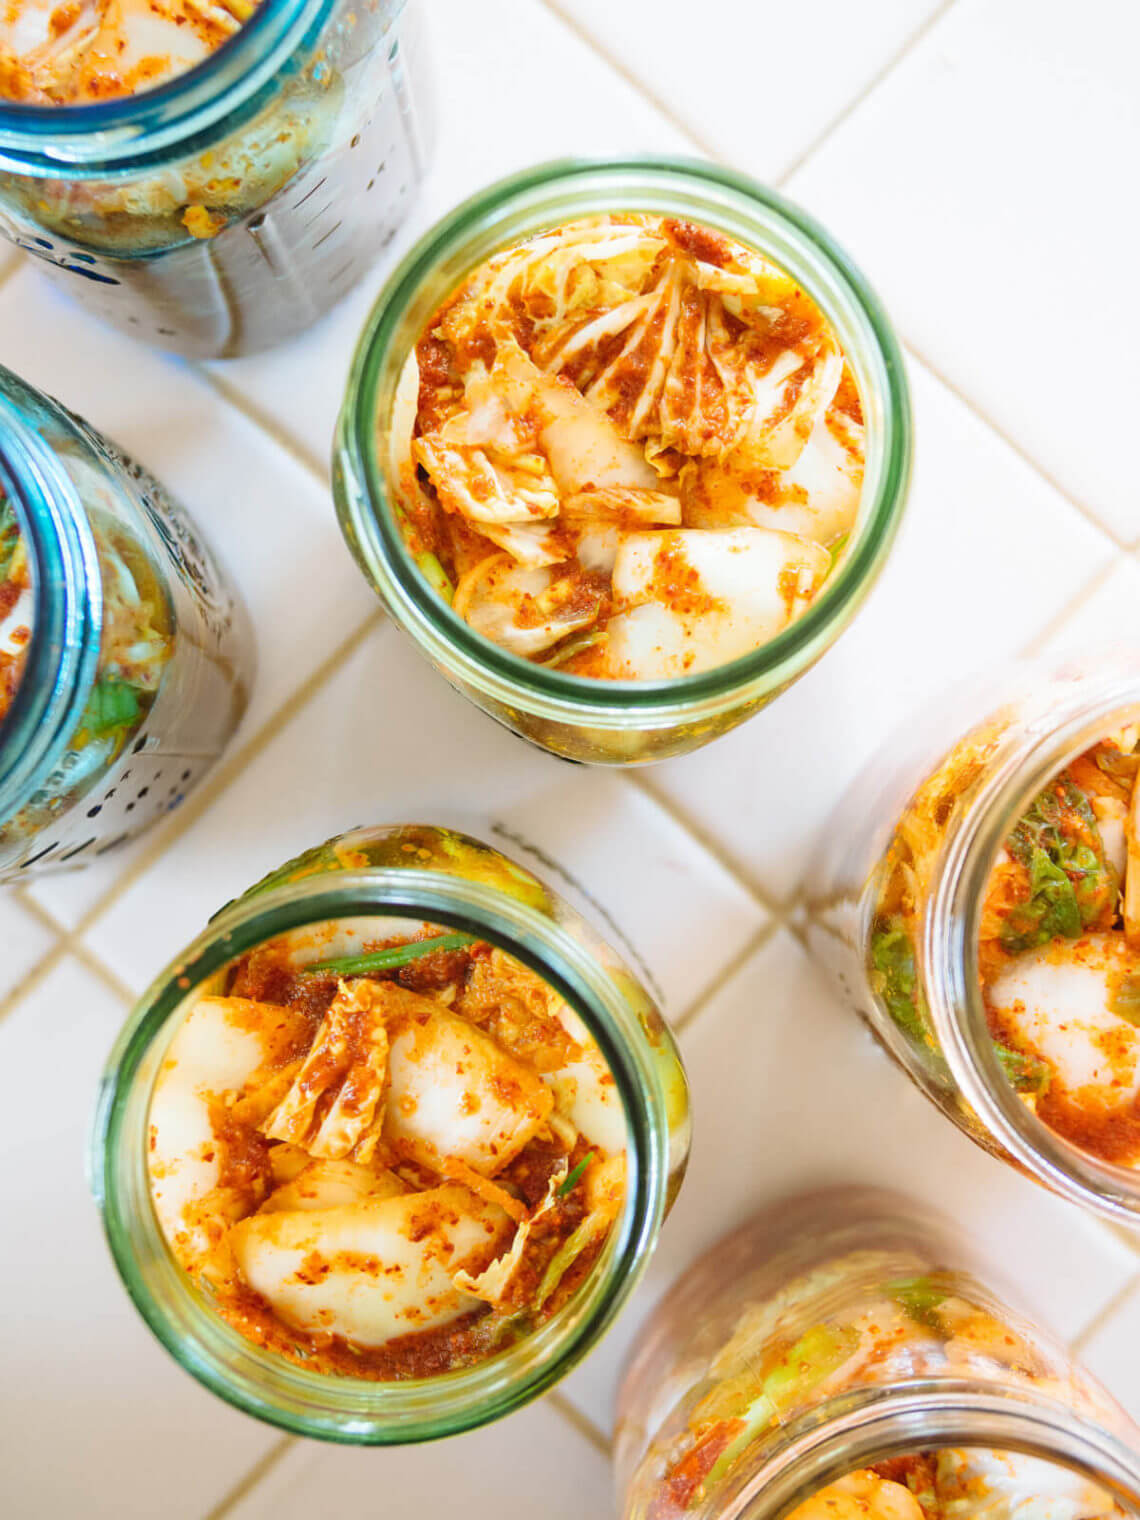 Quick and easy kimchi (even if you don't live near an Asian market)